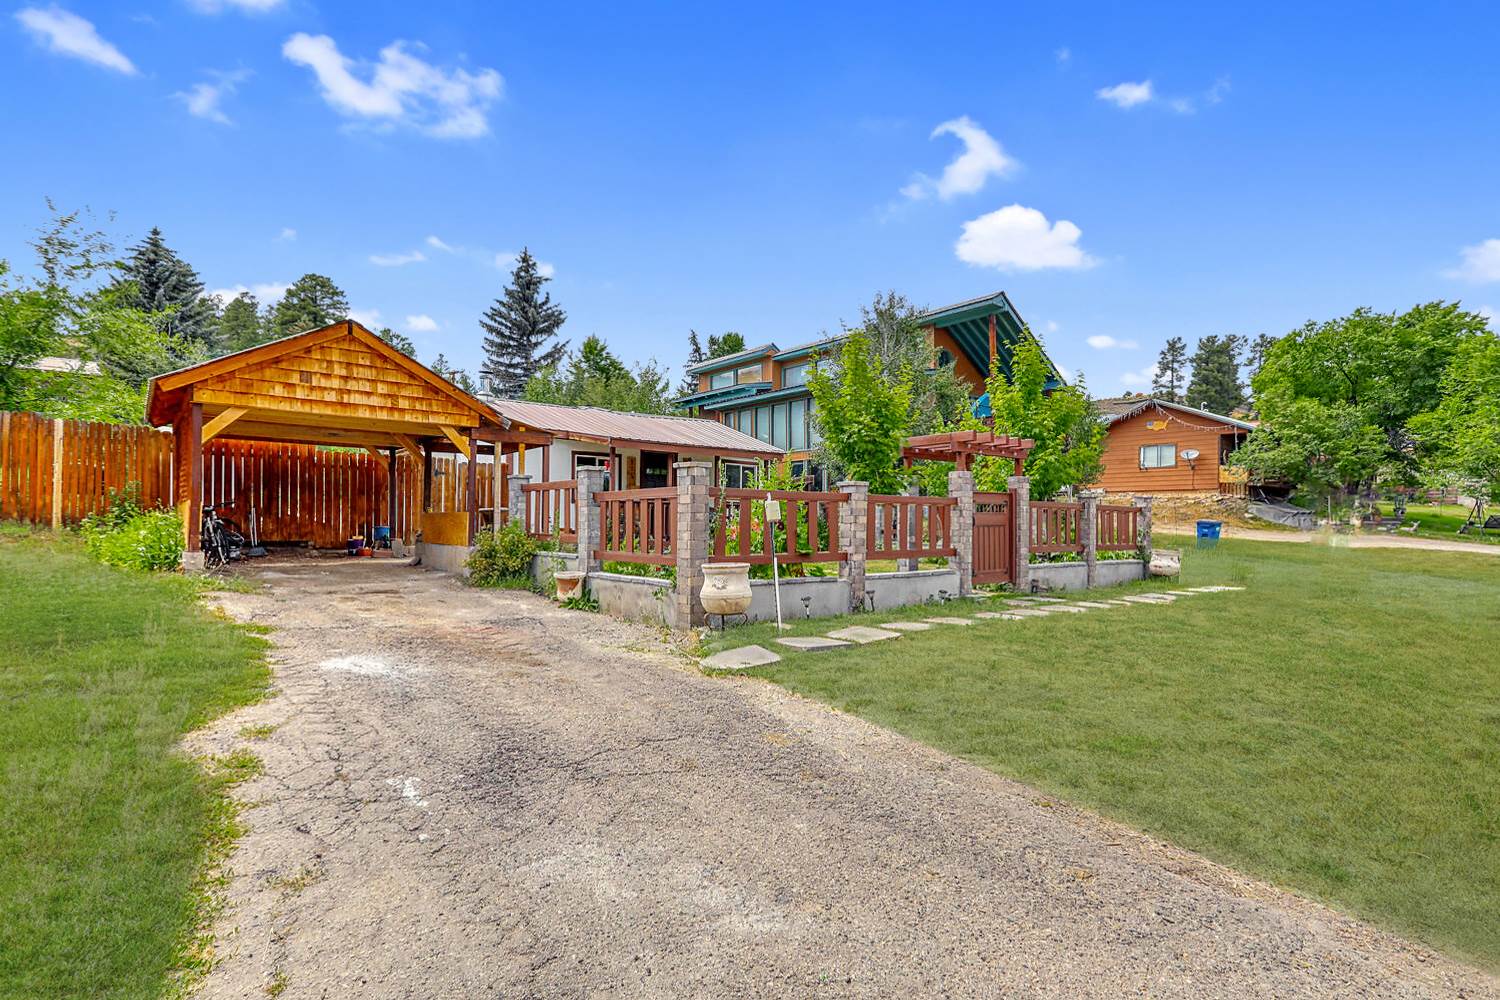 335 S 9th St, Pagosa Springs, CO 81147